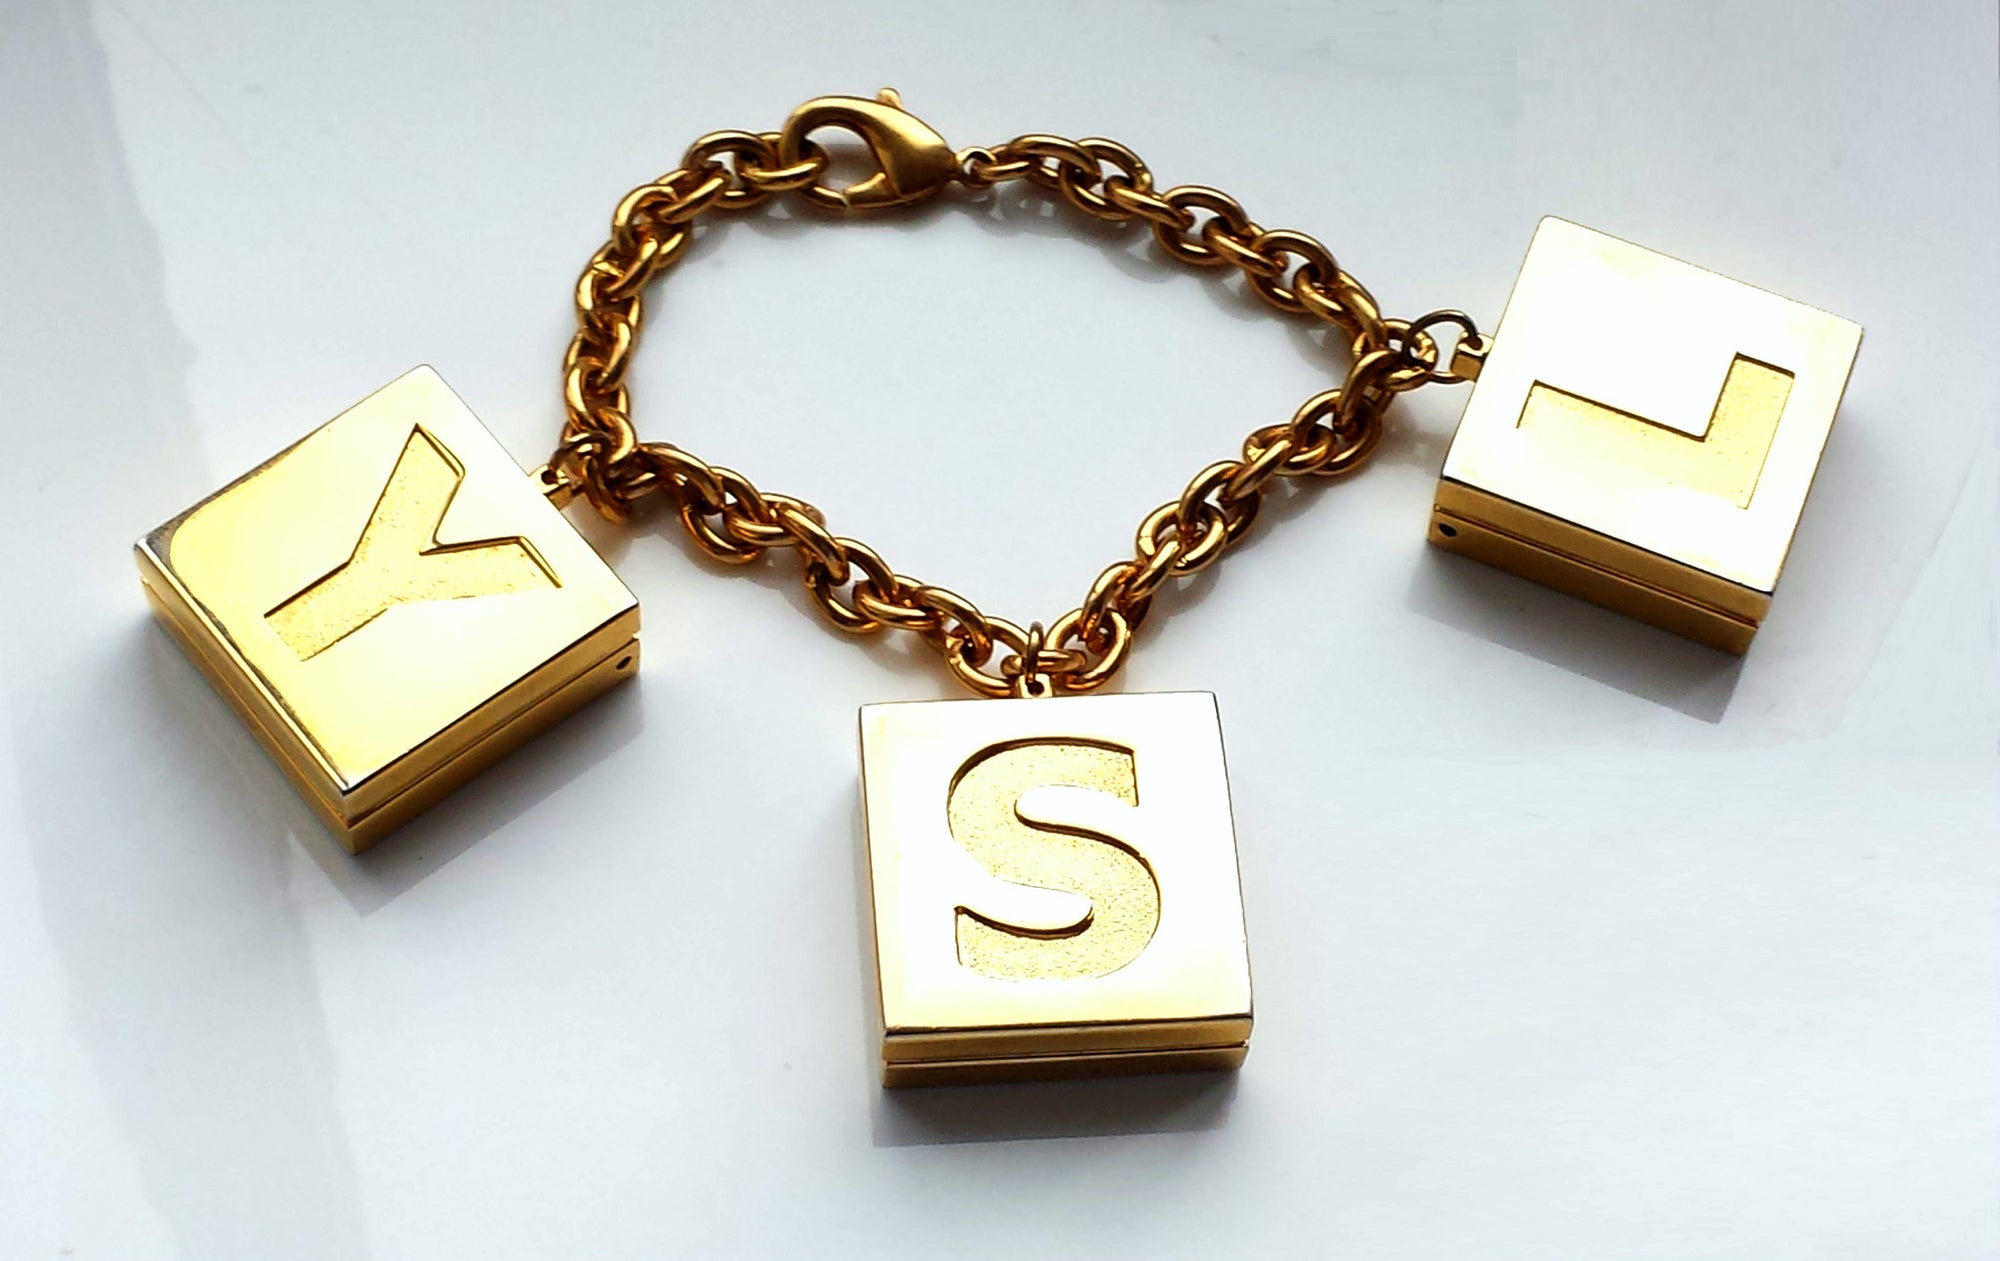 Vintage YSL Yves Saint Laurent Gold Tone Limited Edition Bracelet with Lip Gloss